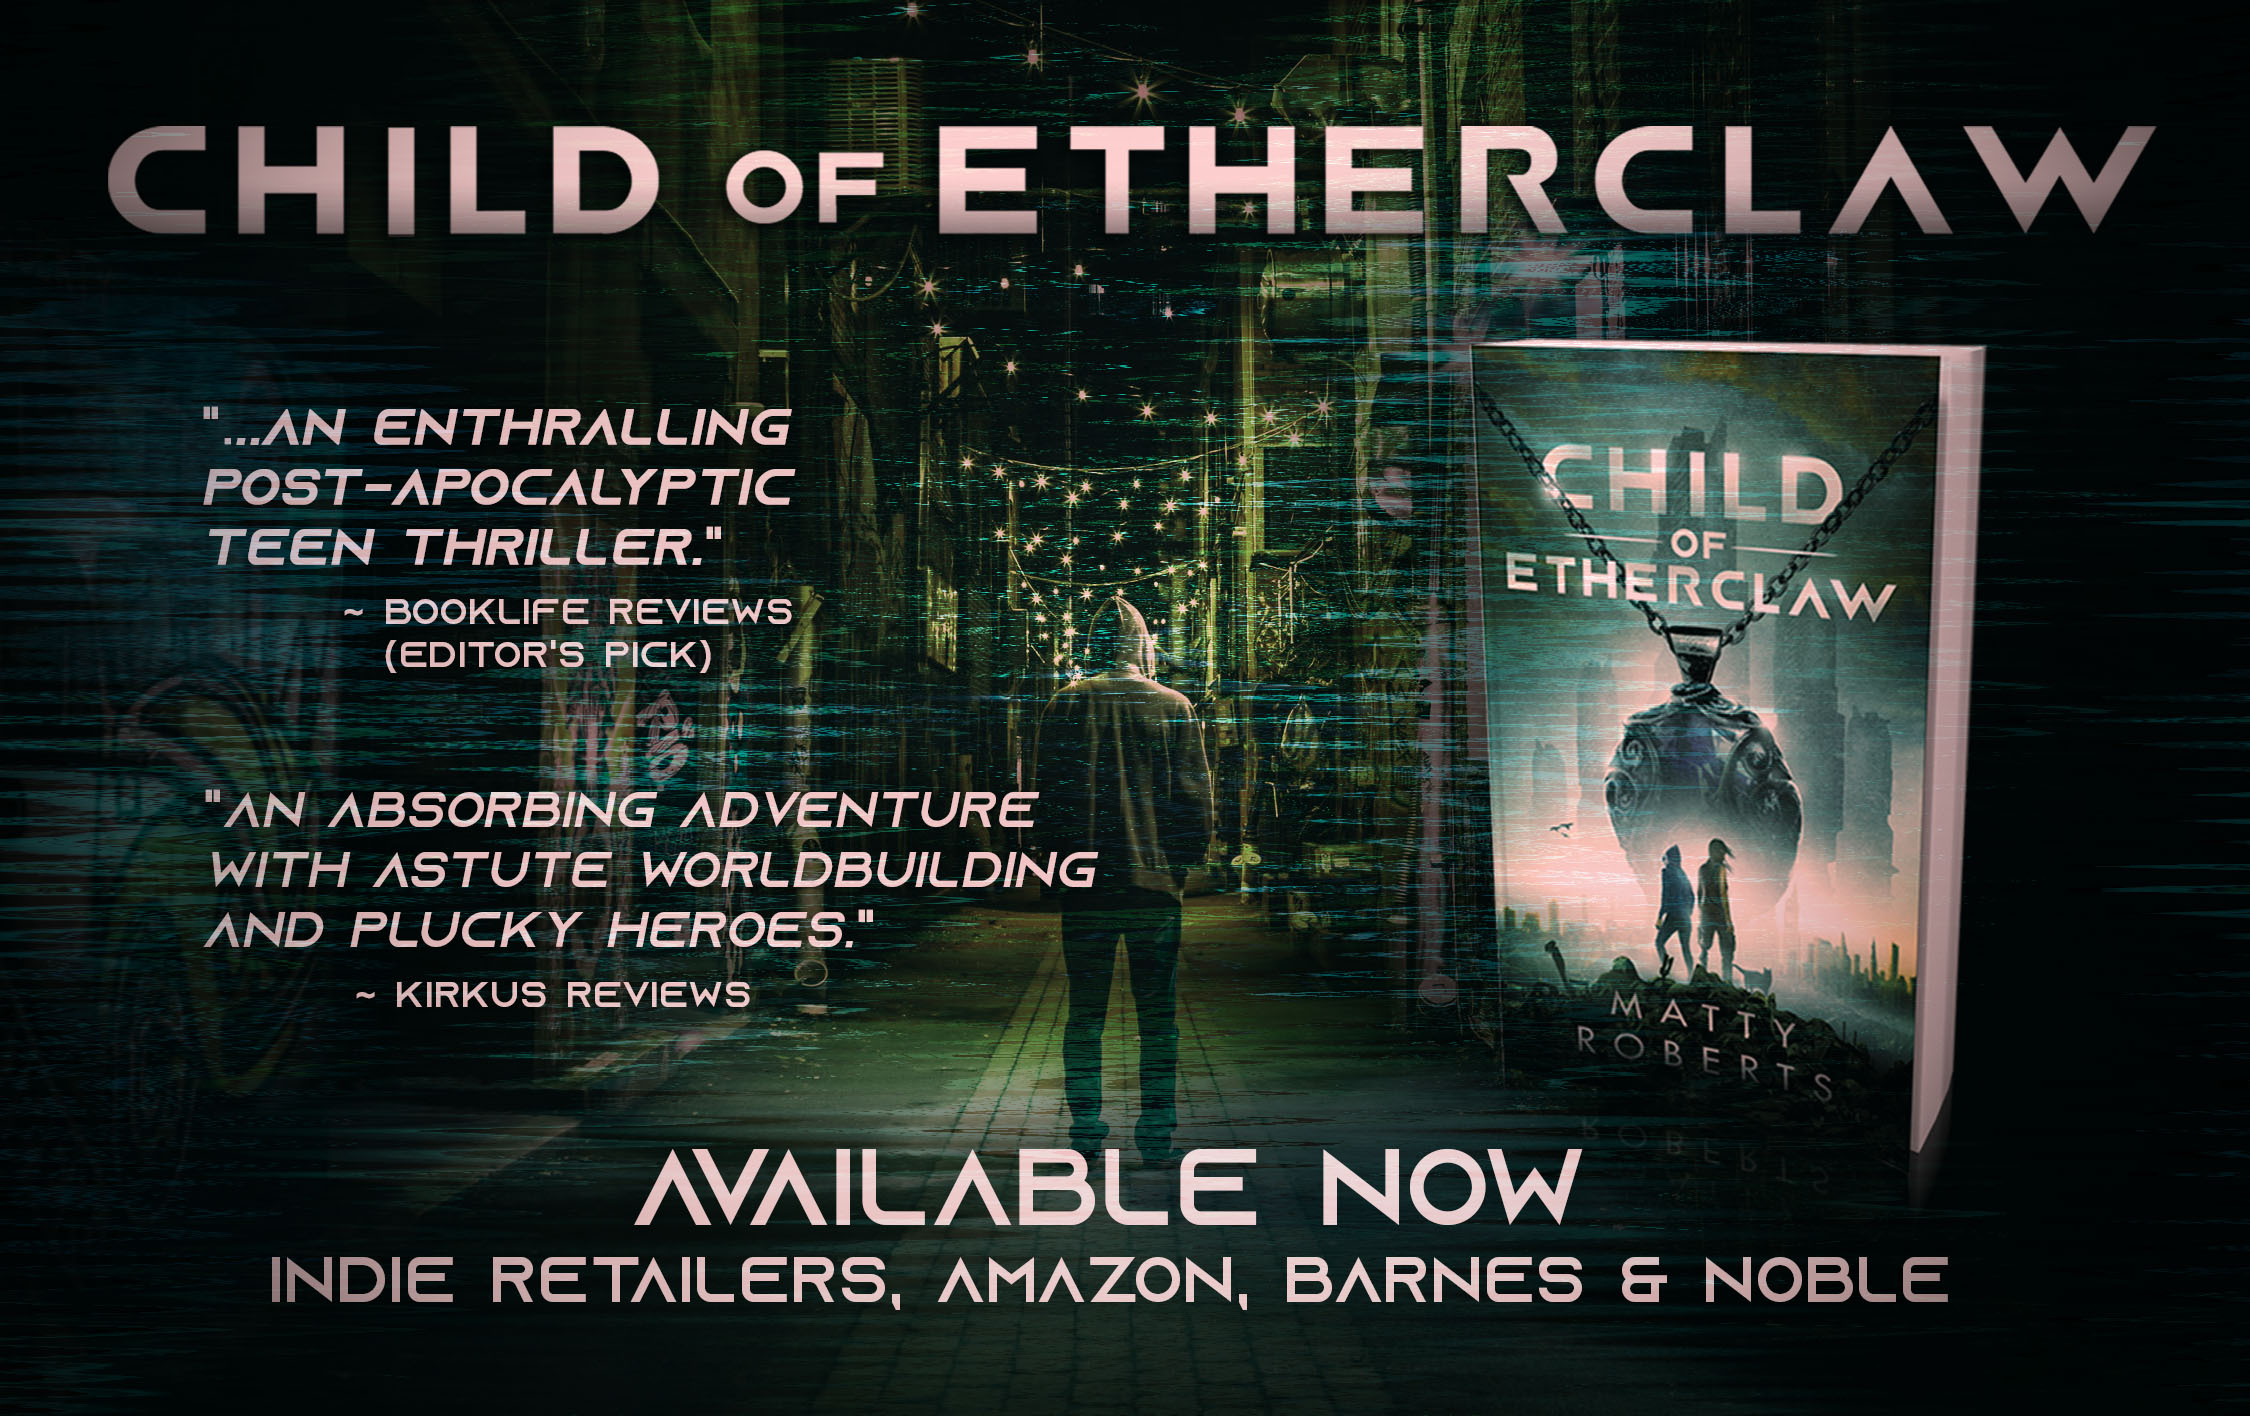 Child of Etherclaw: 'An absorbing adventure with astute worldbuilding and plucky heroes.' (Kirkus Reviews), '...an enthralling post-apocalyptic teen thriller.' (Booklife Reviews, Editor's Pick)